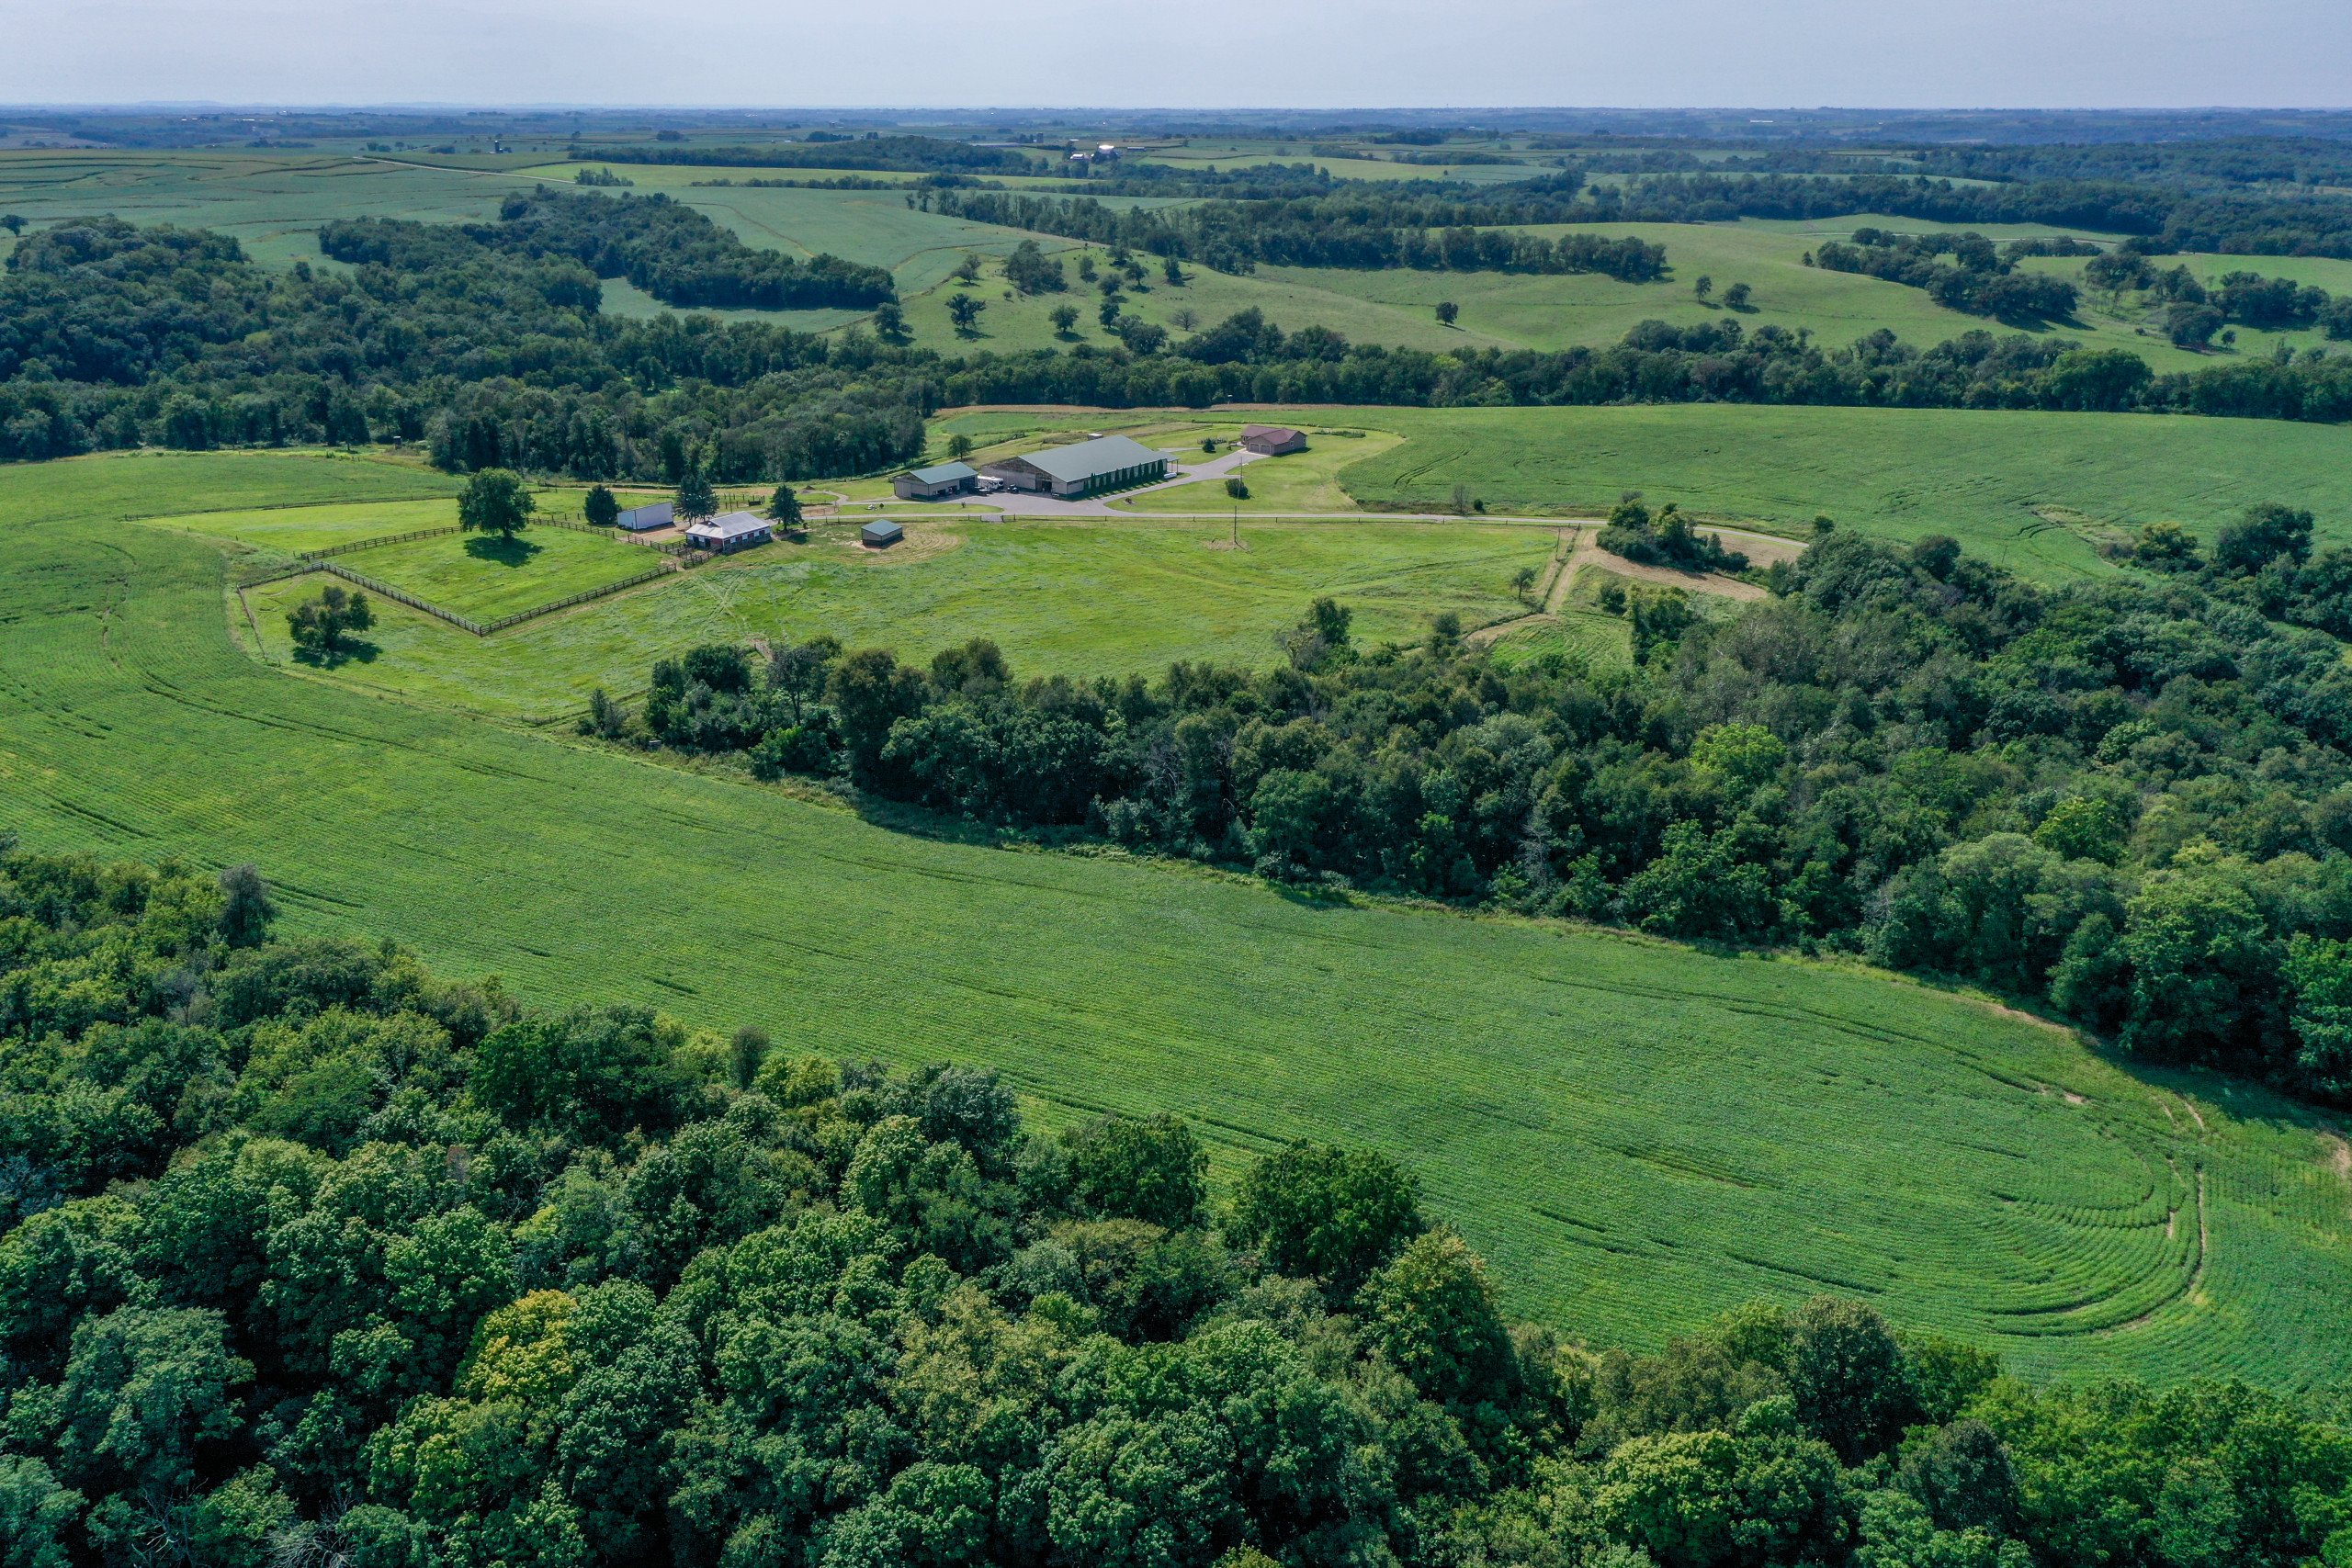 residential-land-grant-county-wisconsin-0-acres-listing-number-16393-DJI_0298-2.jpg